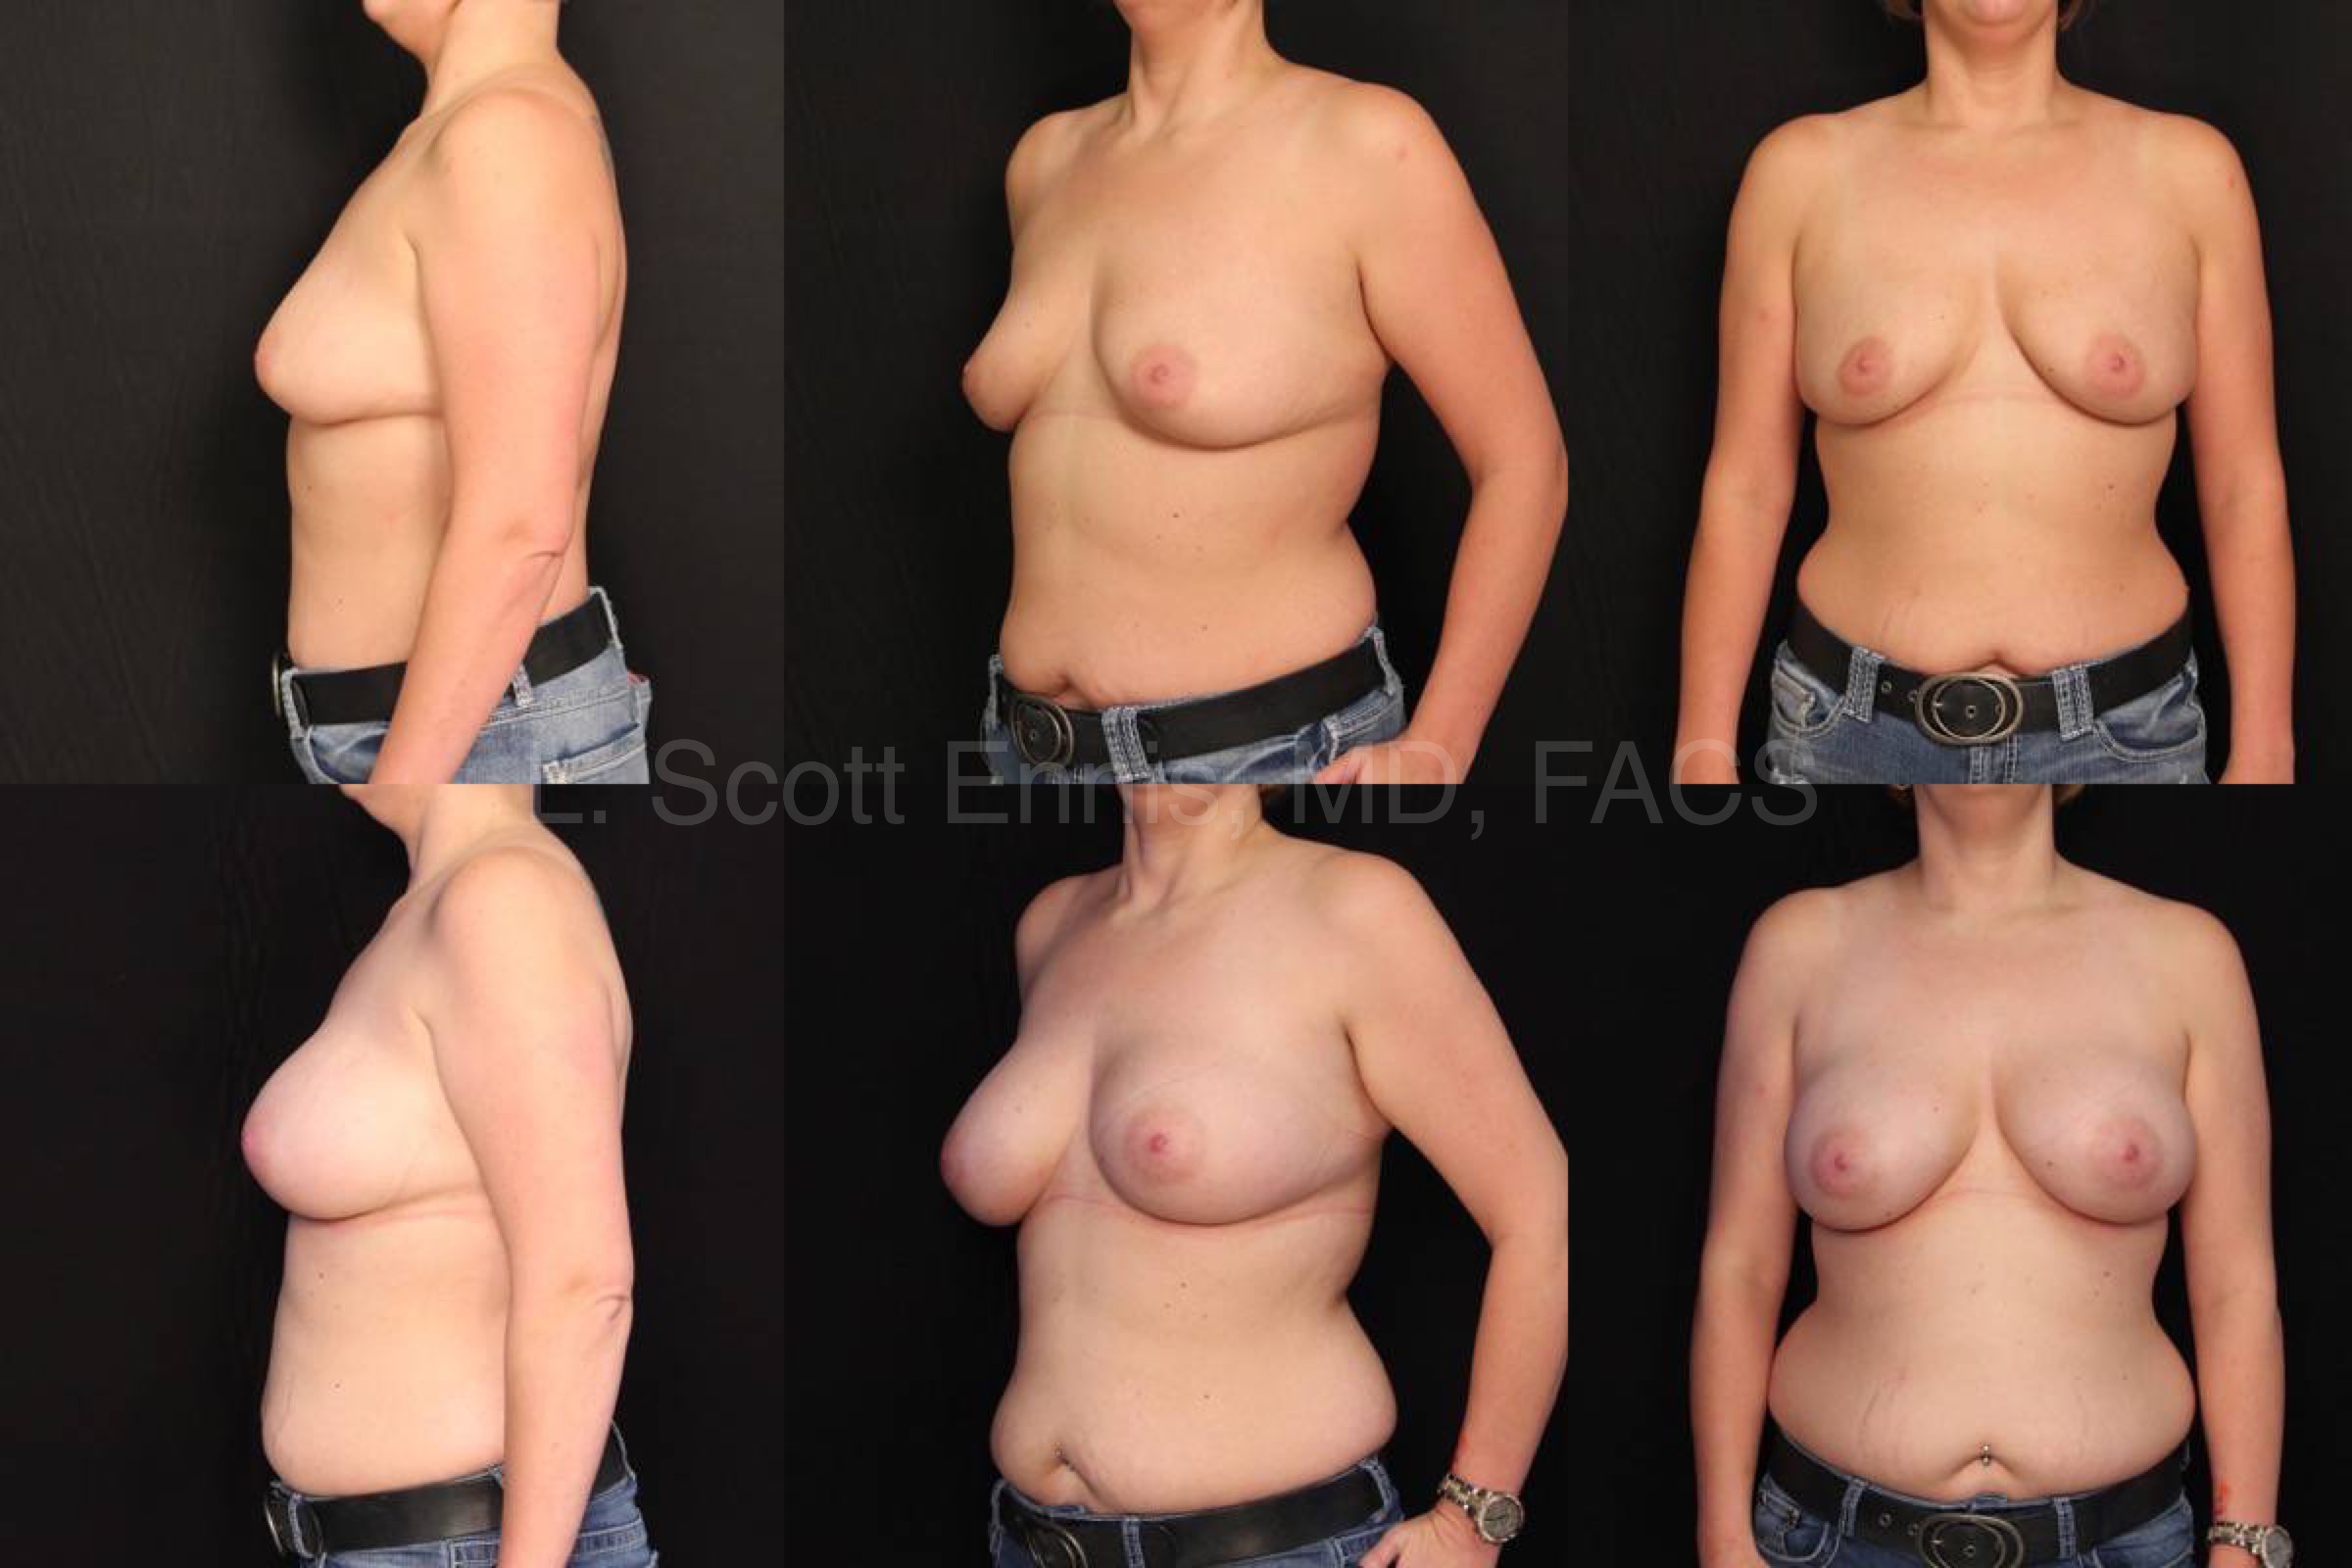 Endoscopic Transaxillary Breast Augmentation Mentor Moderate Plus R500 L450 Before and After Ennis Plastic Surgery Palm Beach Boca Raton Destin Miami Fort Lauderdale